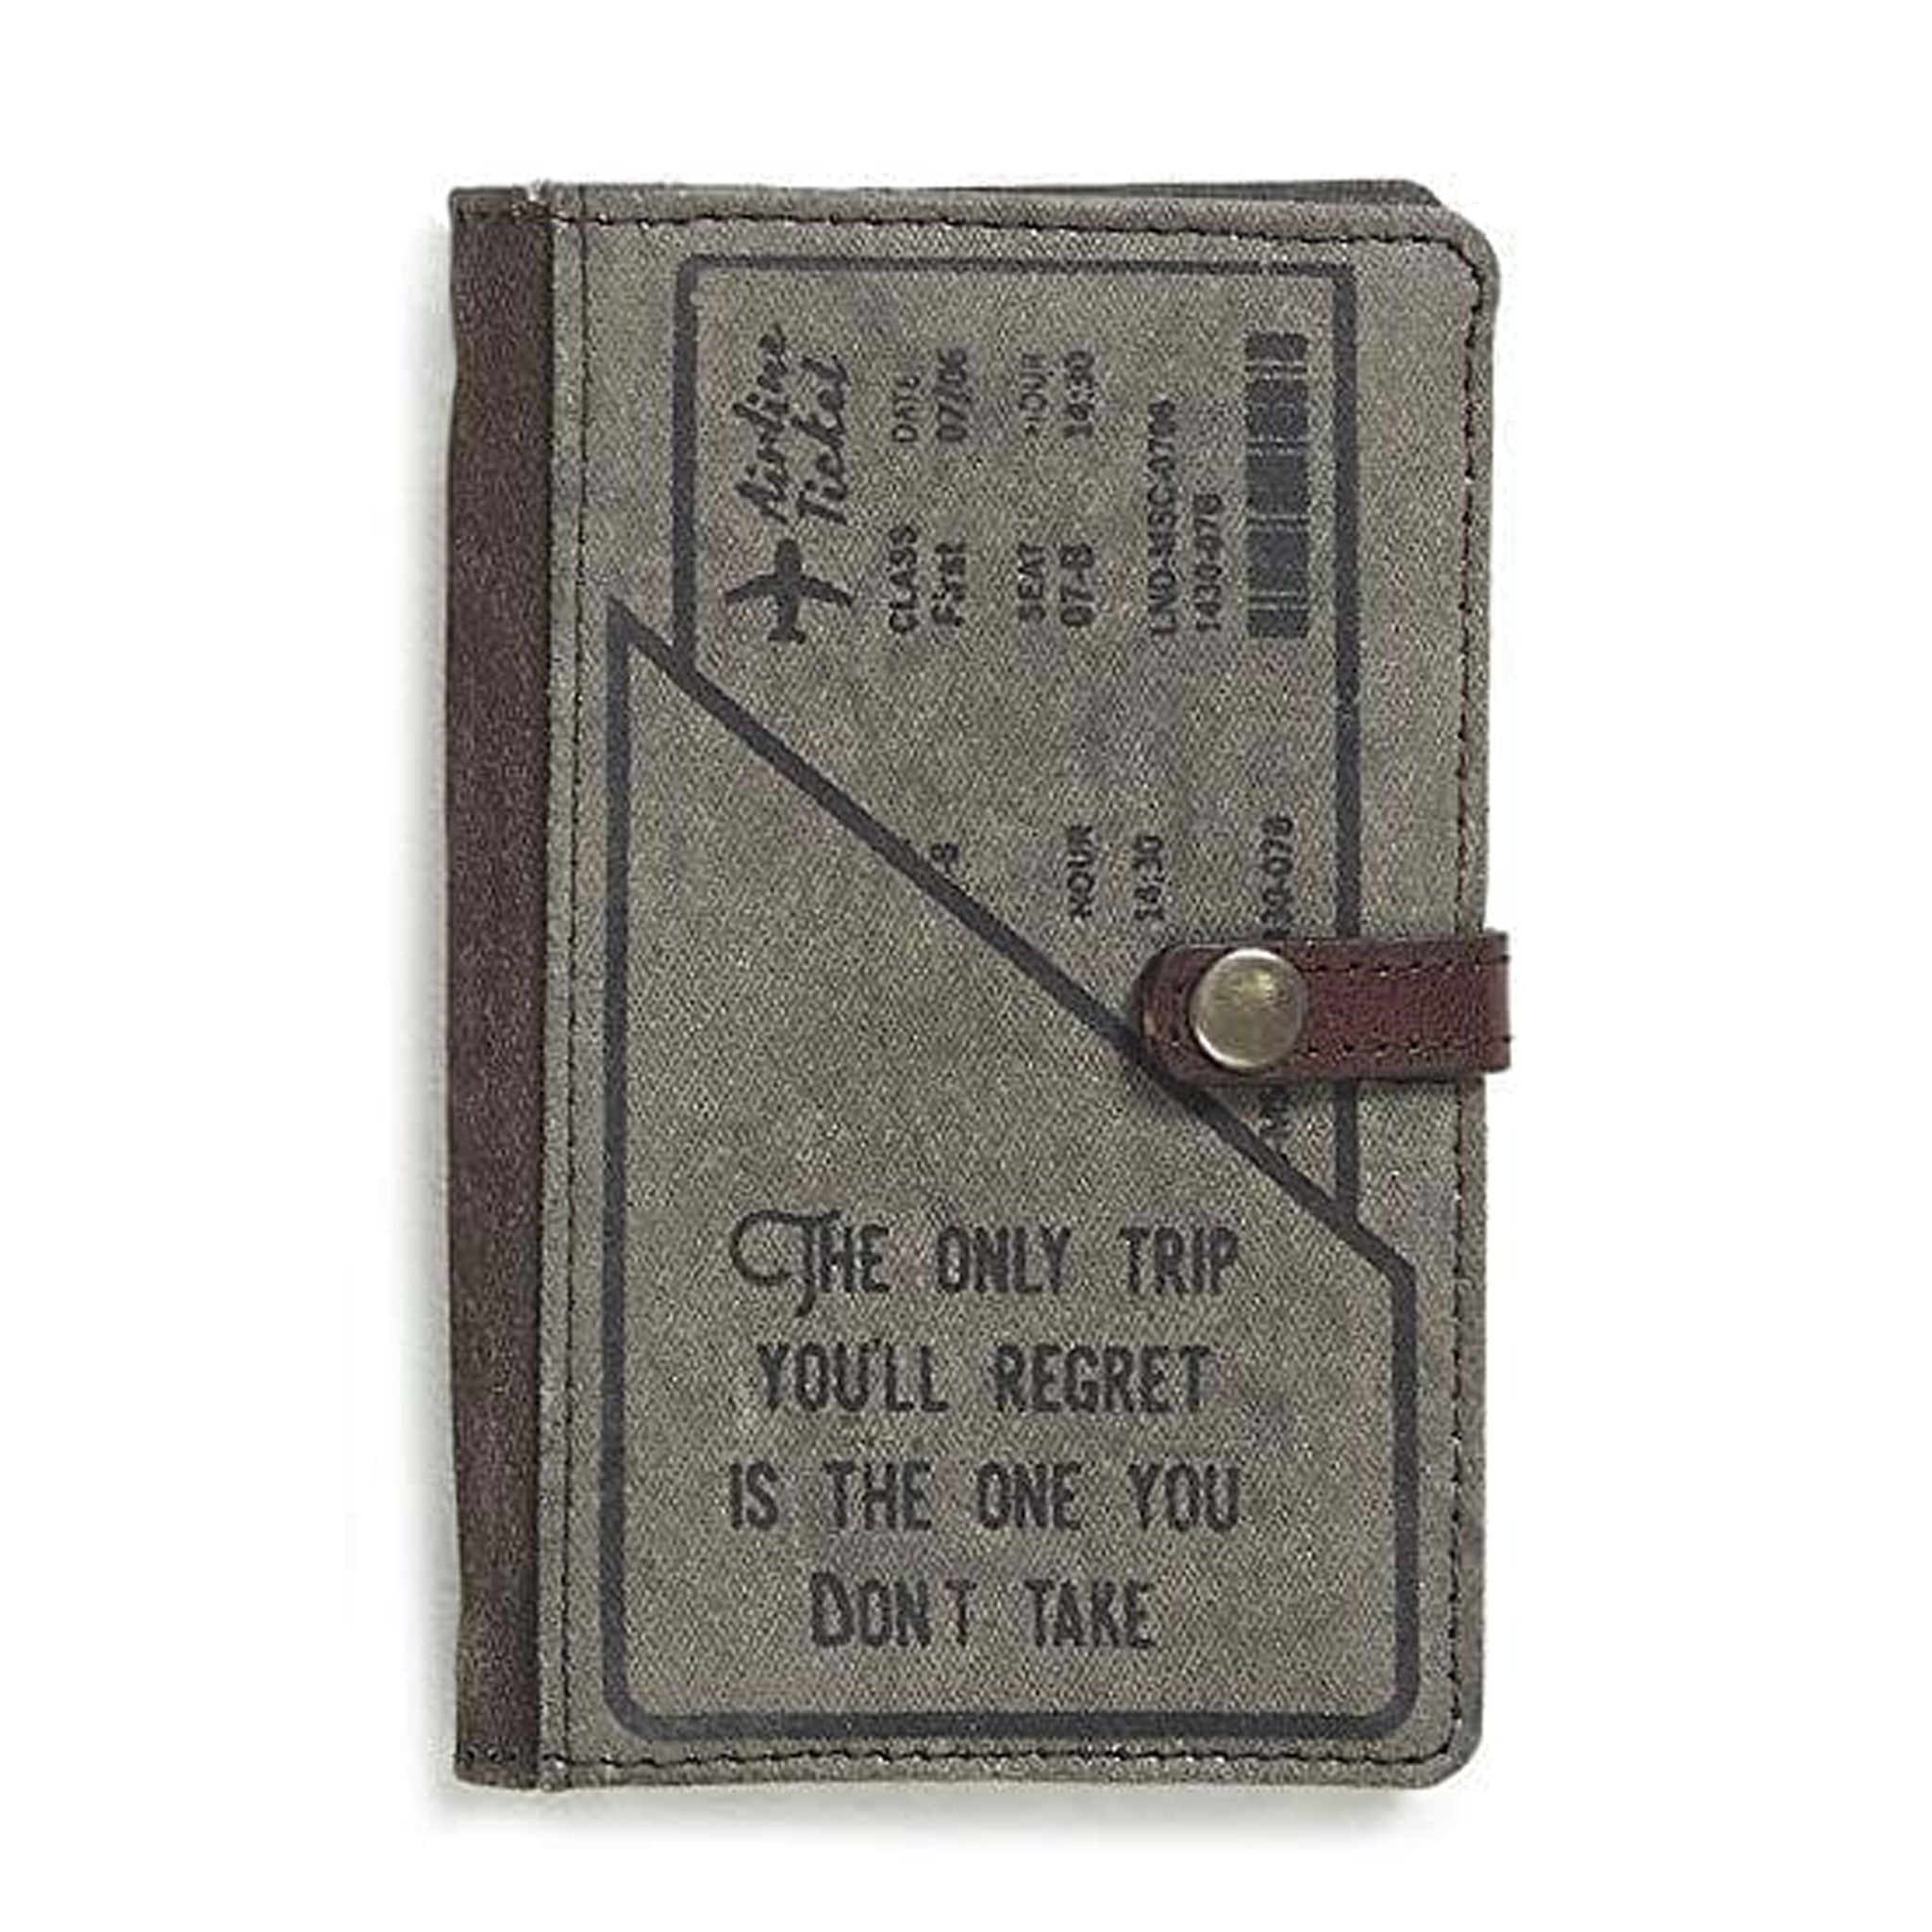 Mona B Pack of Travel Passport Holder Credit Card Wallet Case and Luggage Tag (2 Items) (Trip Regrets Passport Wallet and Luggage Tag)